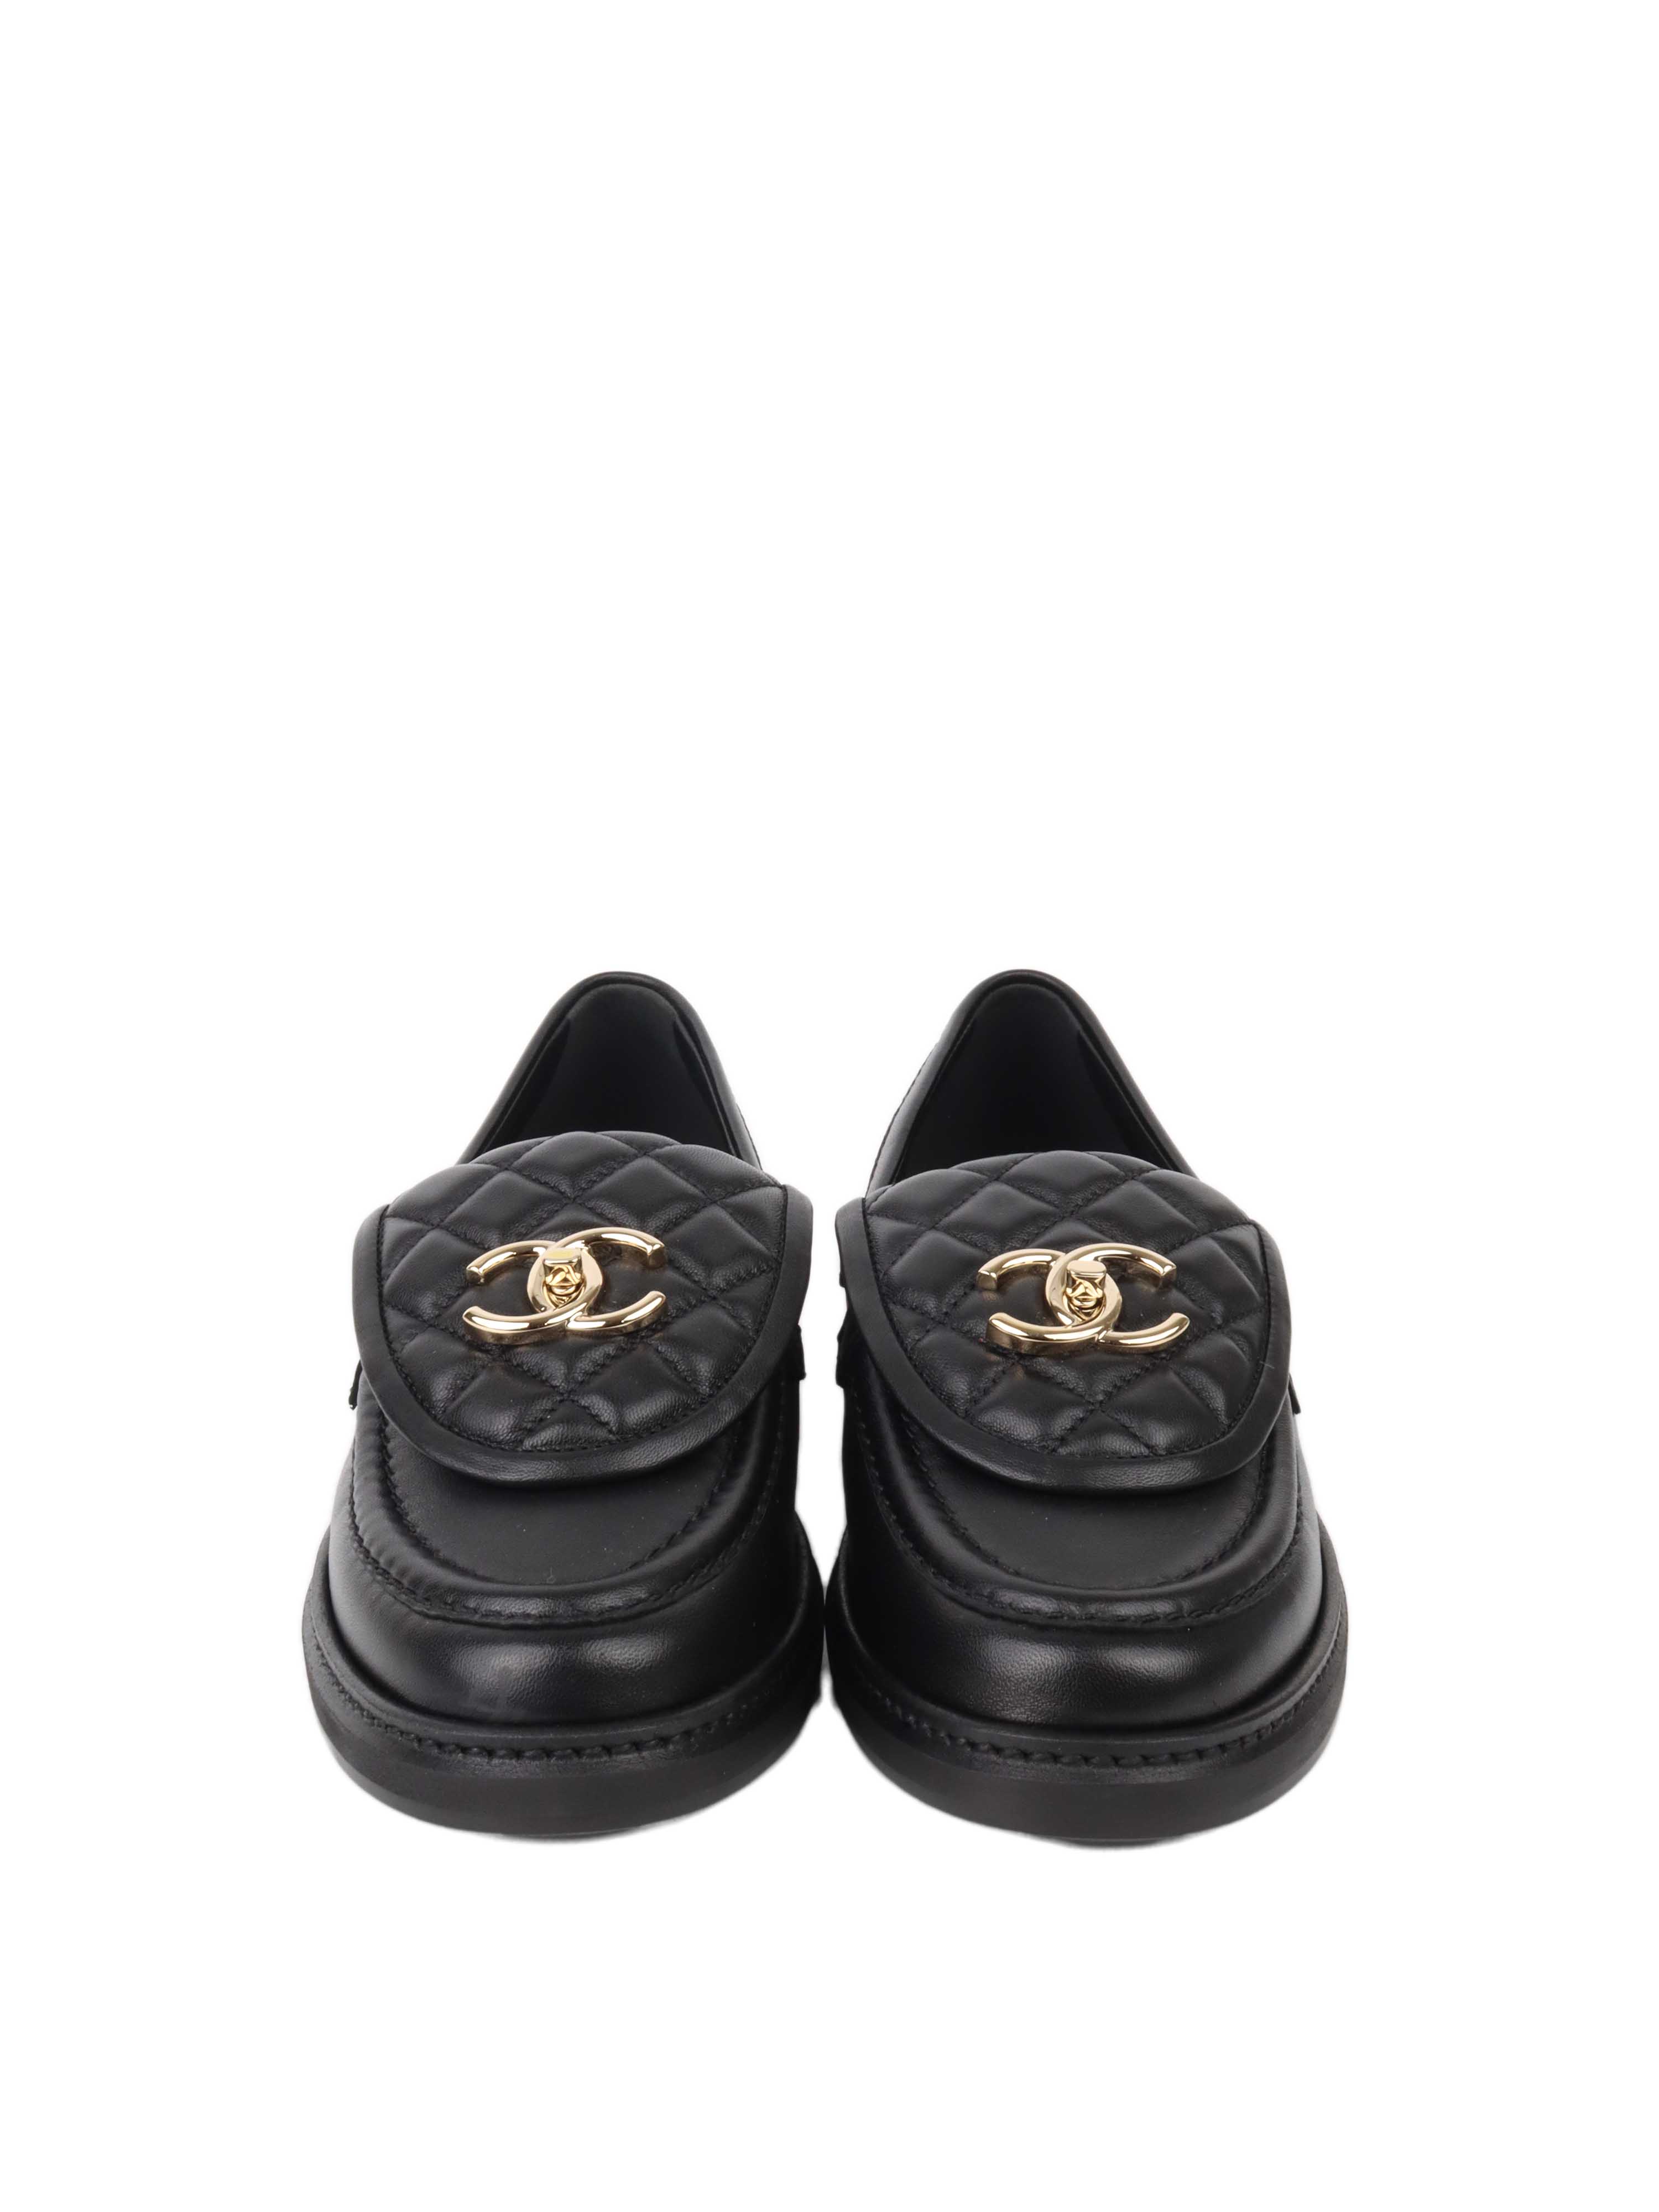 Chanel Quilted Black Loafers Size 36.5